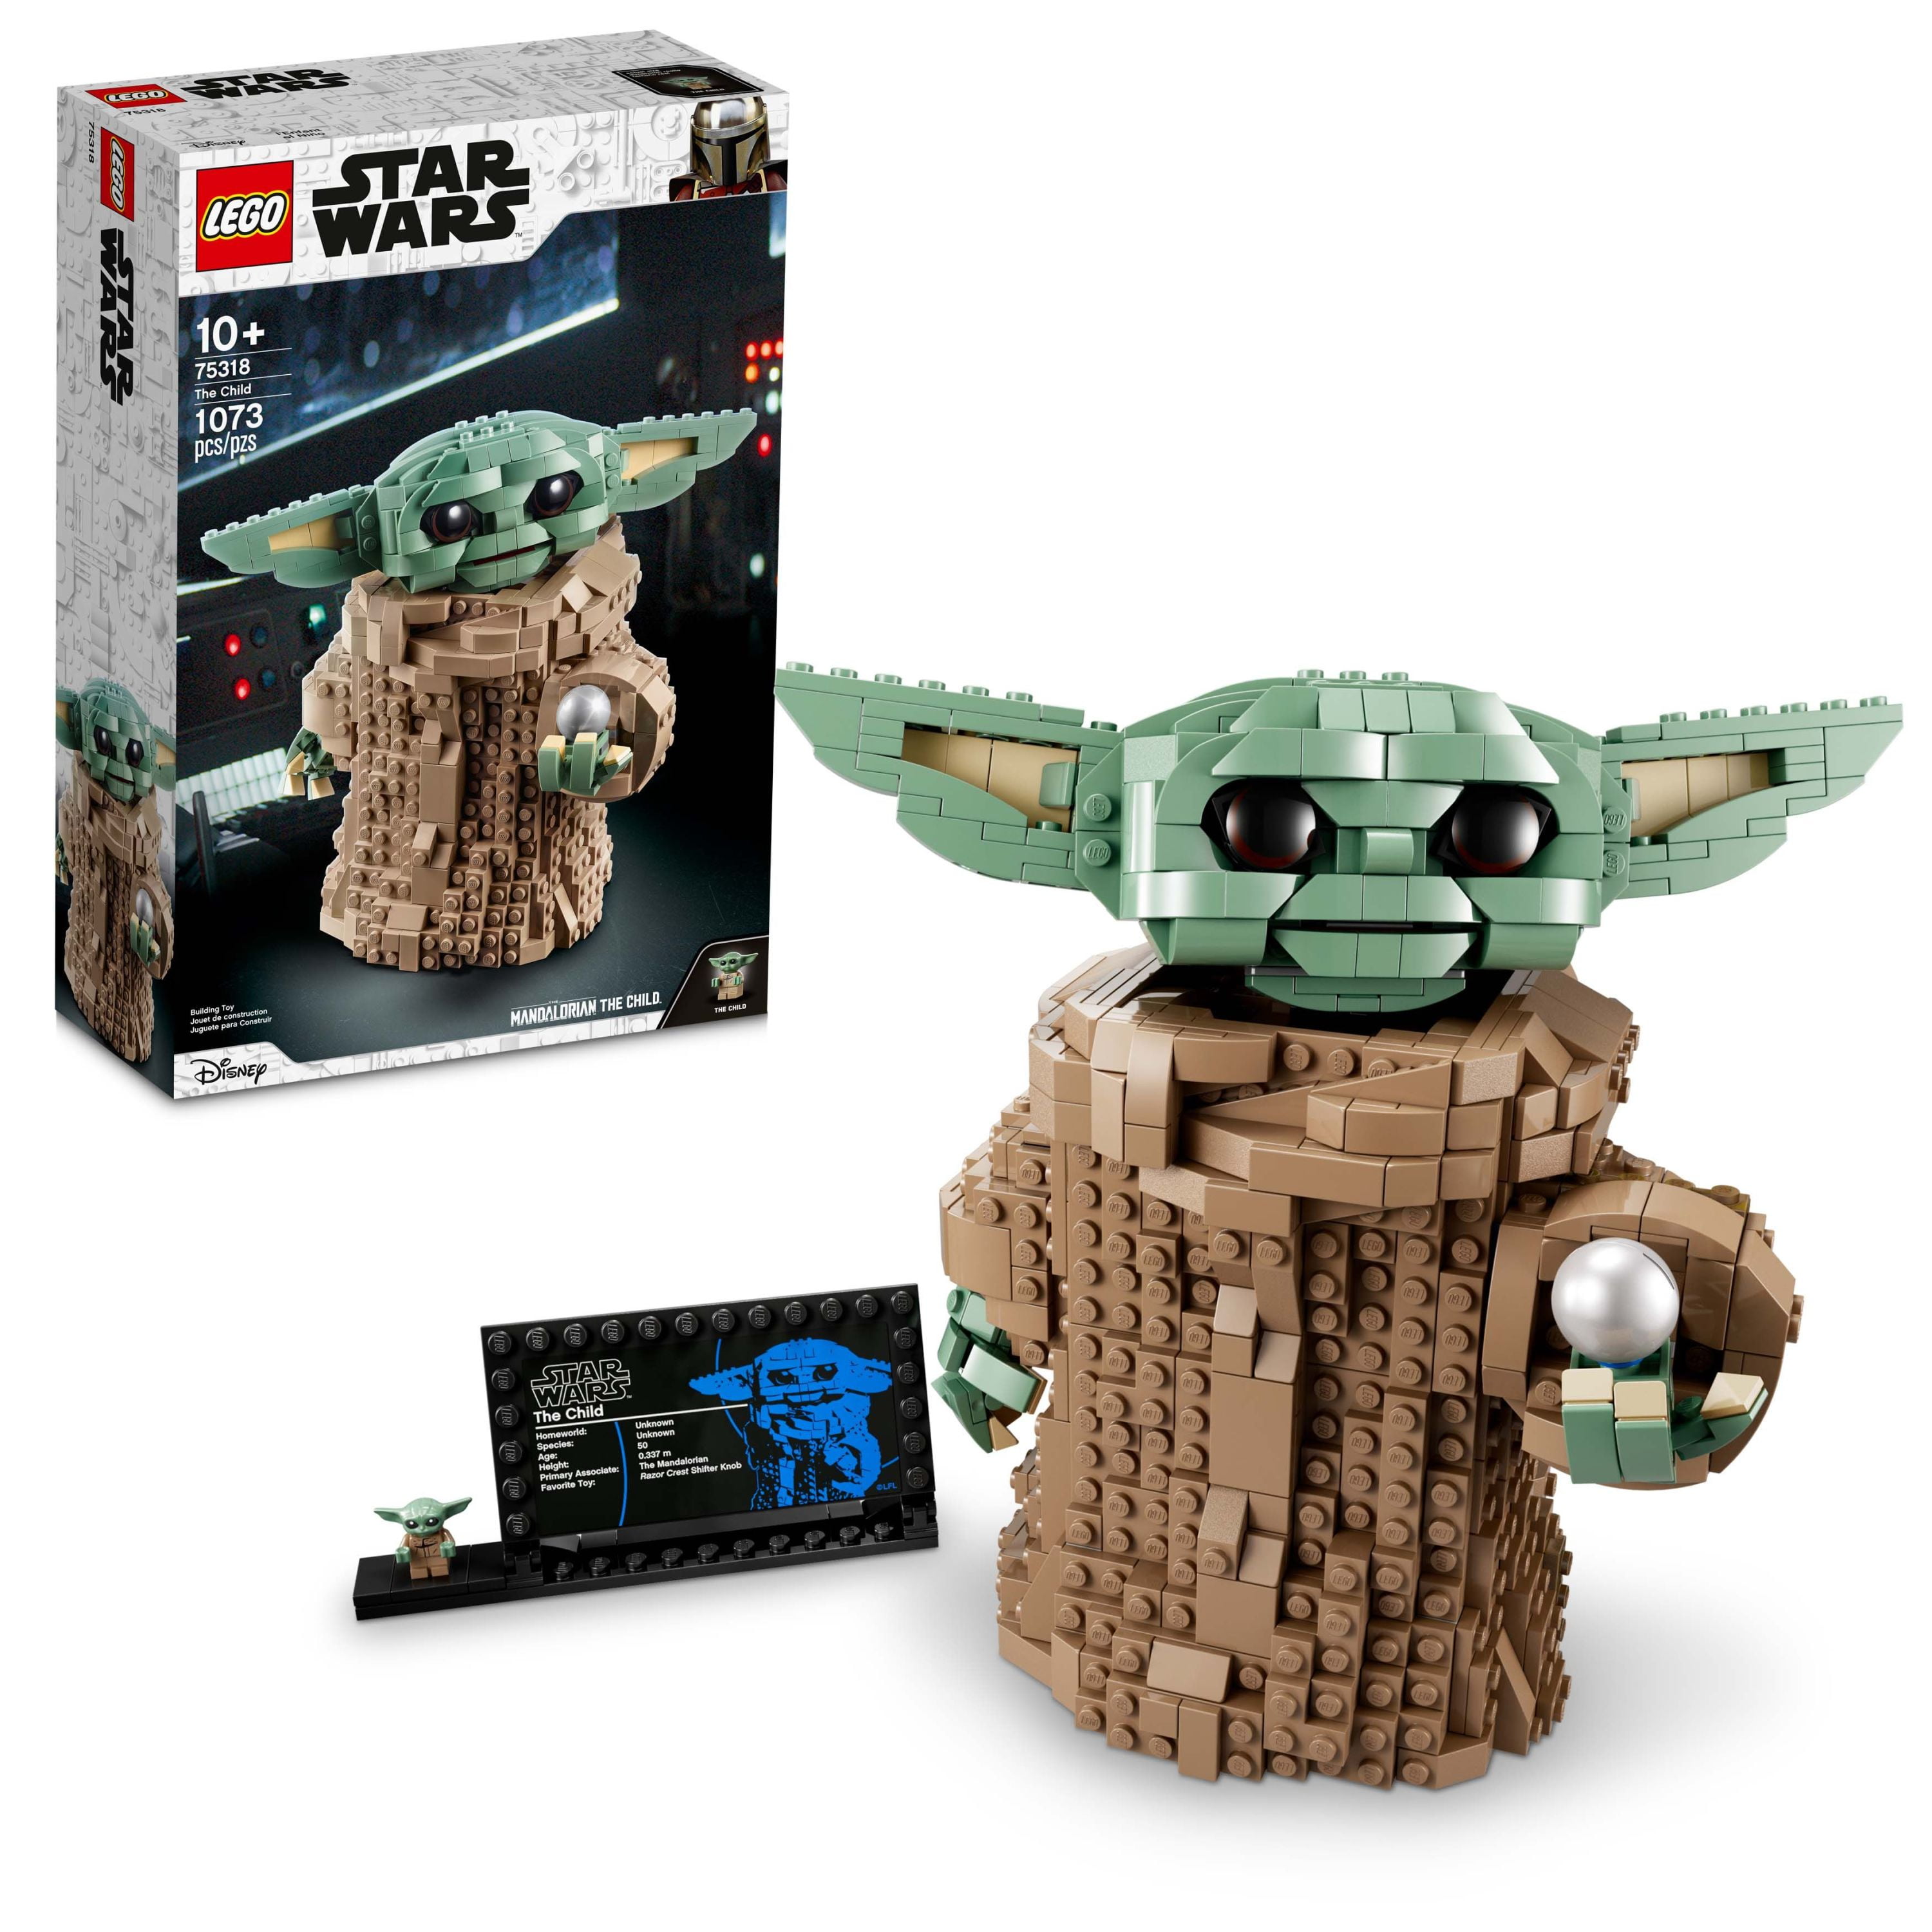 levering Nat Skriv en rapport LEGO Star Wars: The Mandalorian The Child 75318 Baby Yoda Figure, Building  Toy, Collectible Kids' Room Decoration, with Minifigure, Gift Idea -  Walmart.com